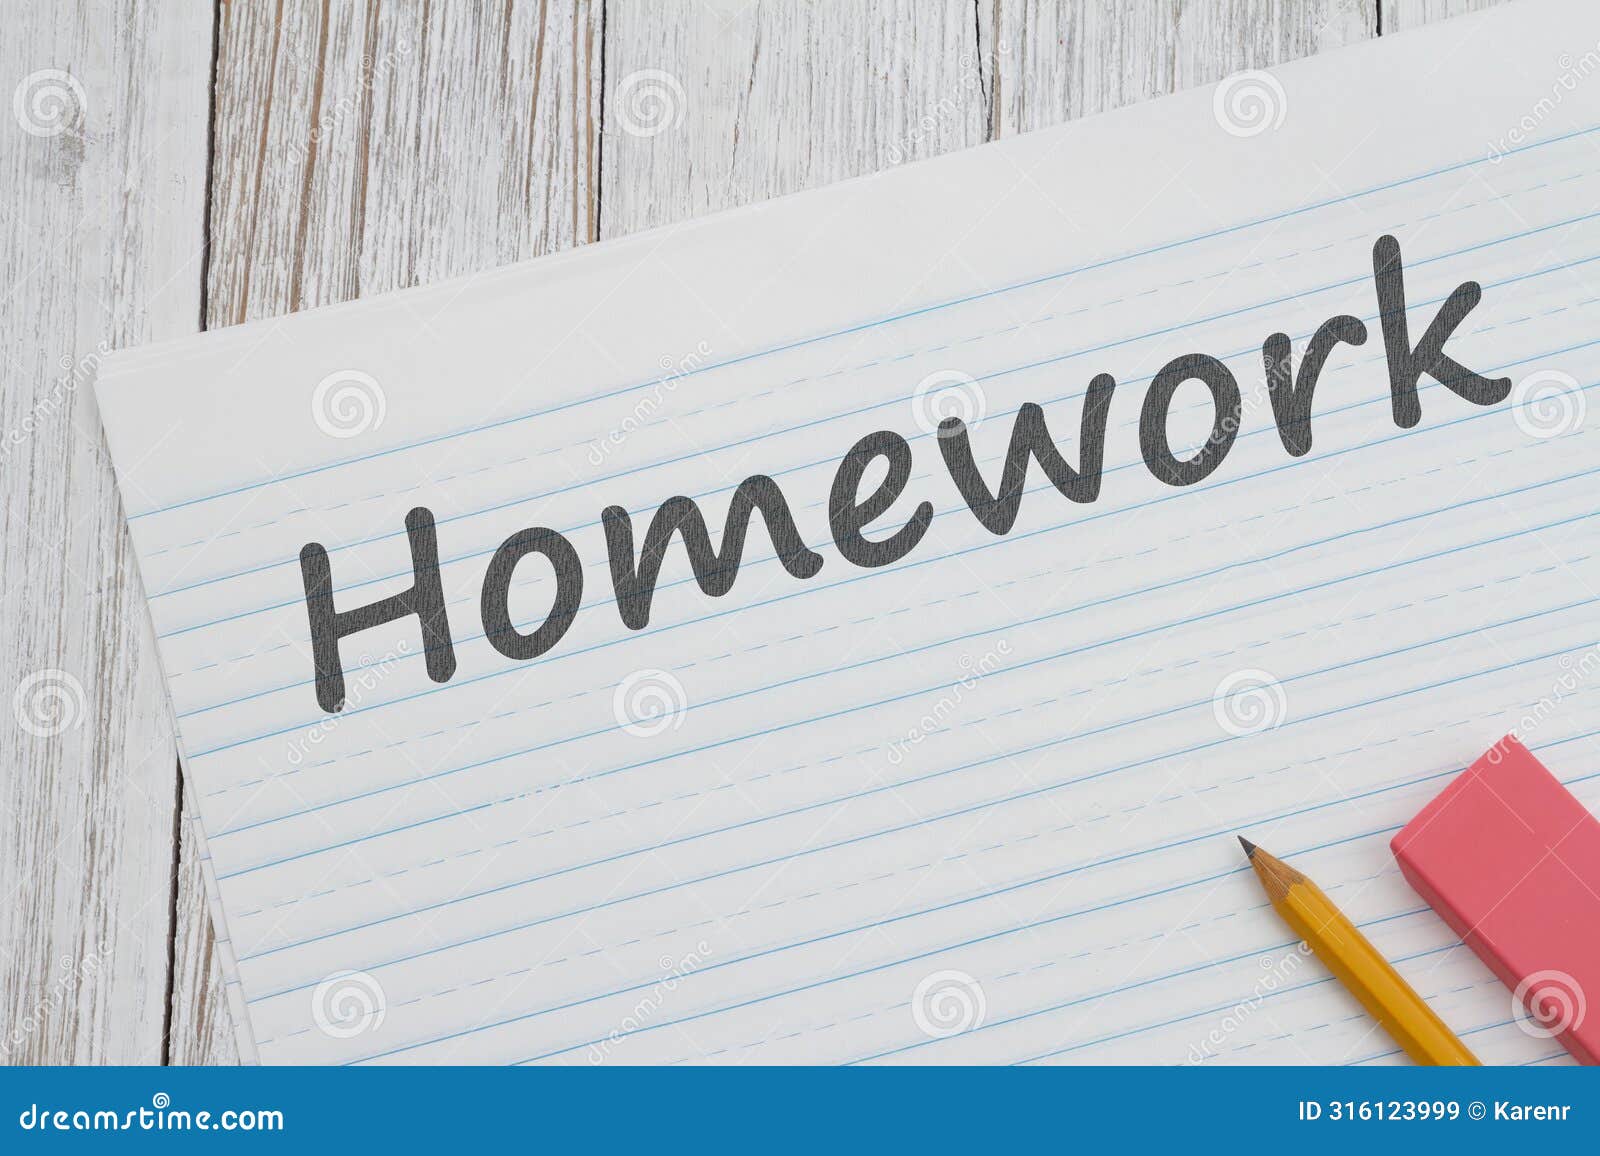 homework message on ruled lined paper with pencil for school